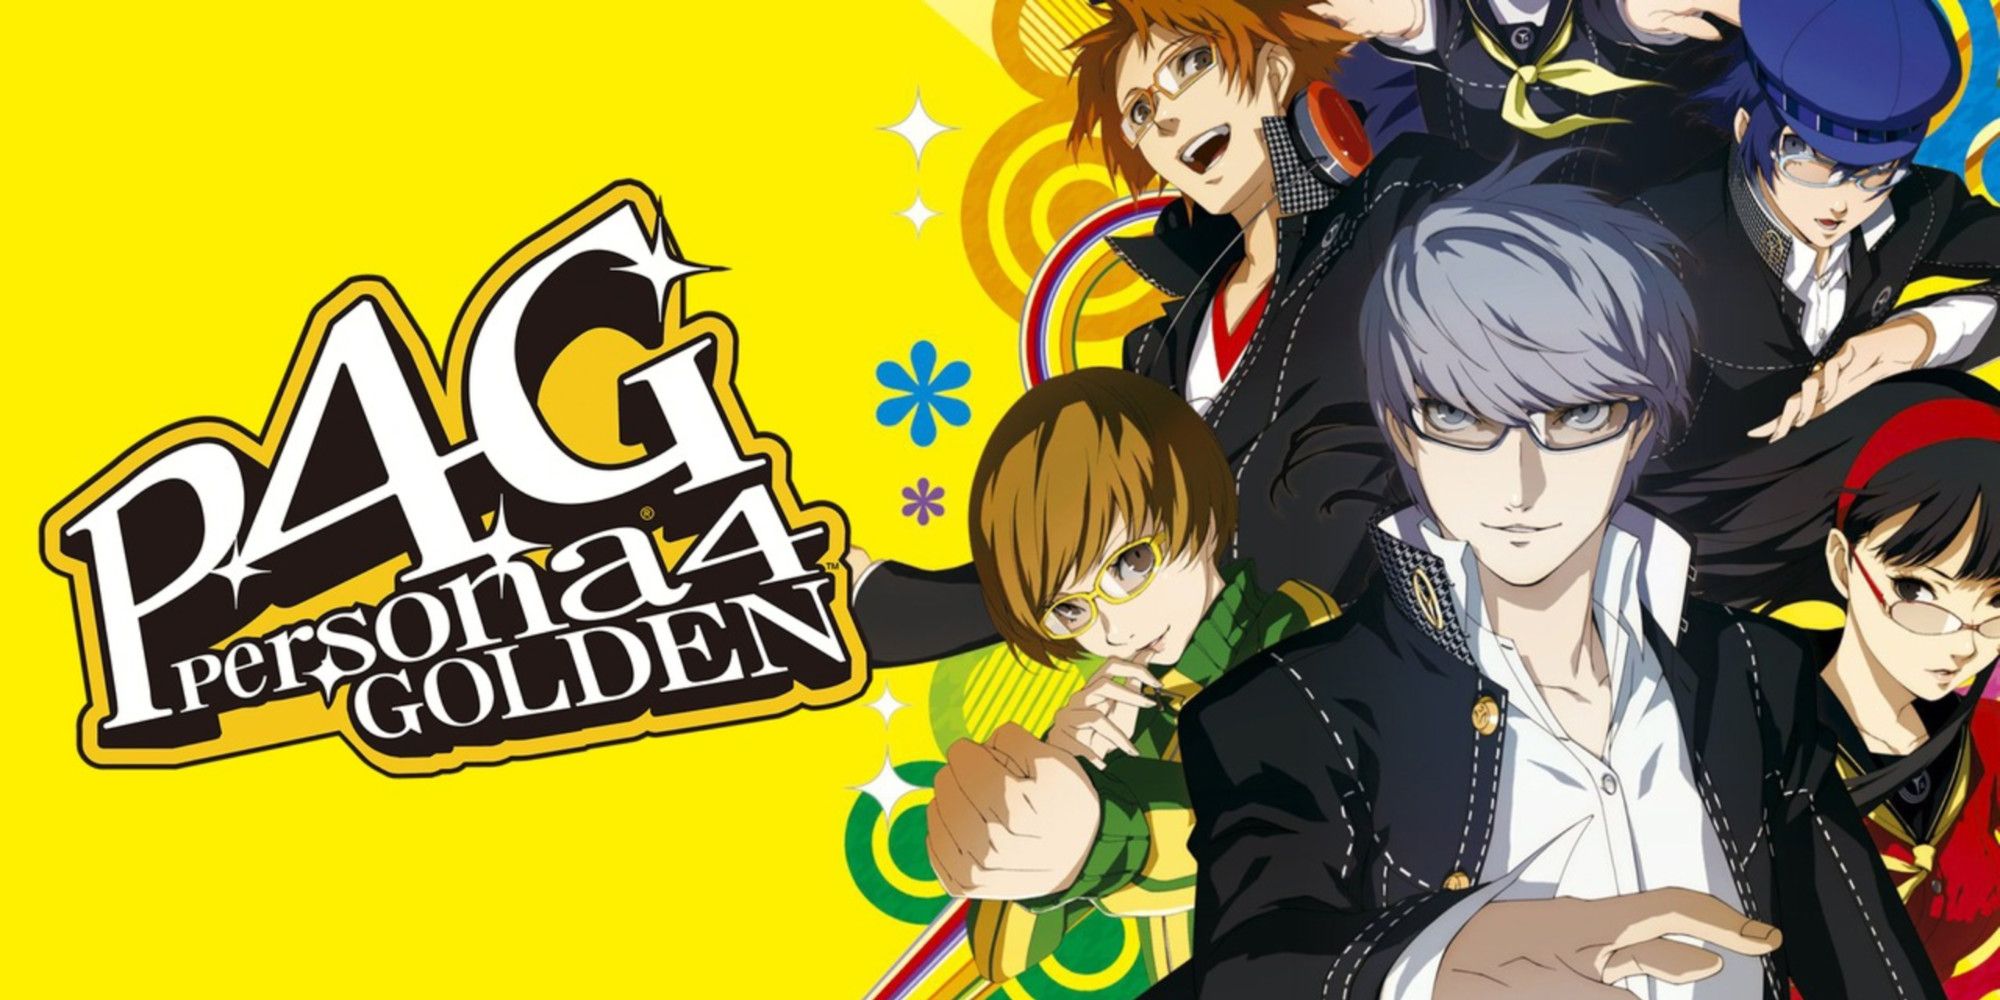 Persona4 logo and characters